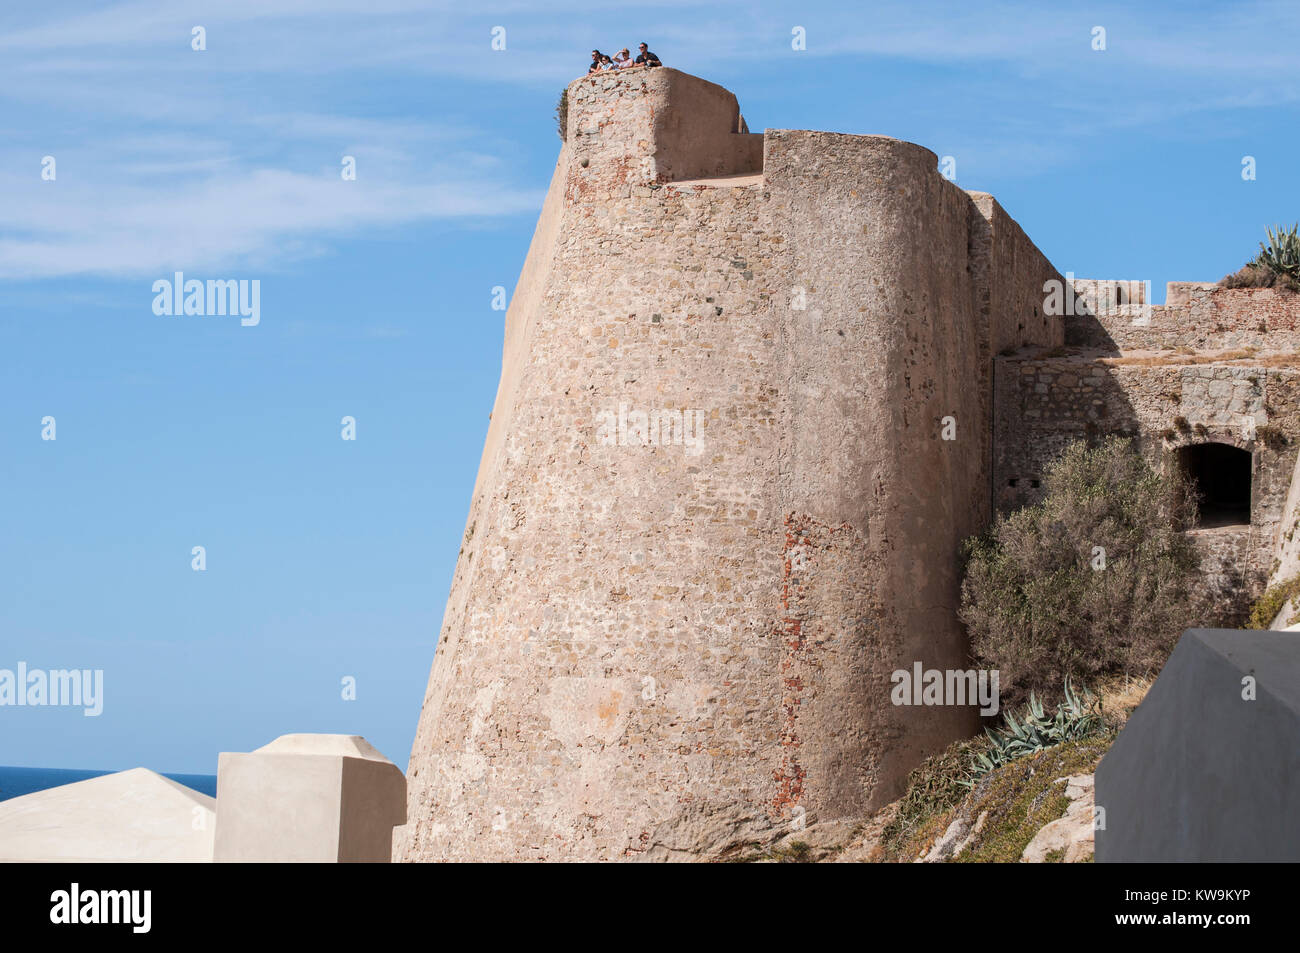 Corsica: architectural details of the ancient walls of the perched Citadel of Calvi, famous tourist destination on the northwest coast Stock Photo